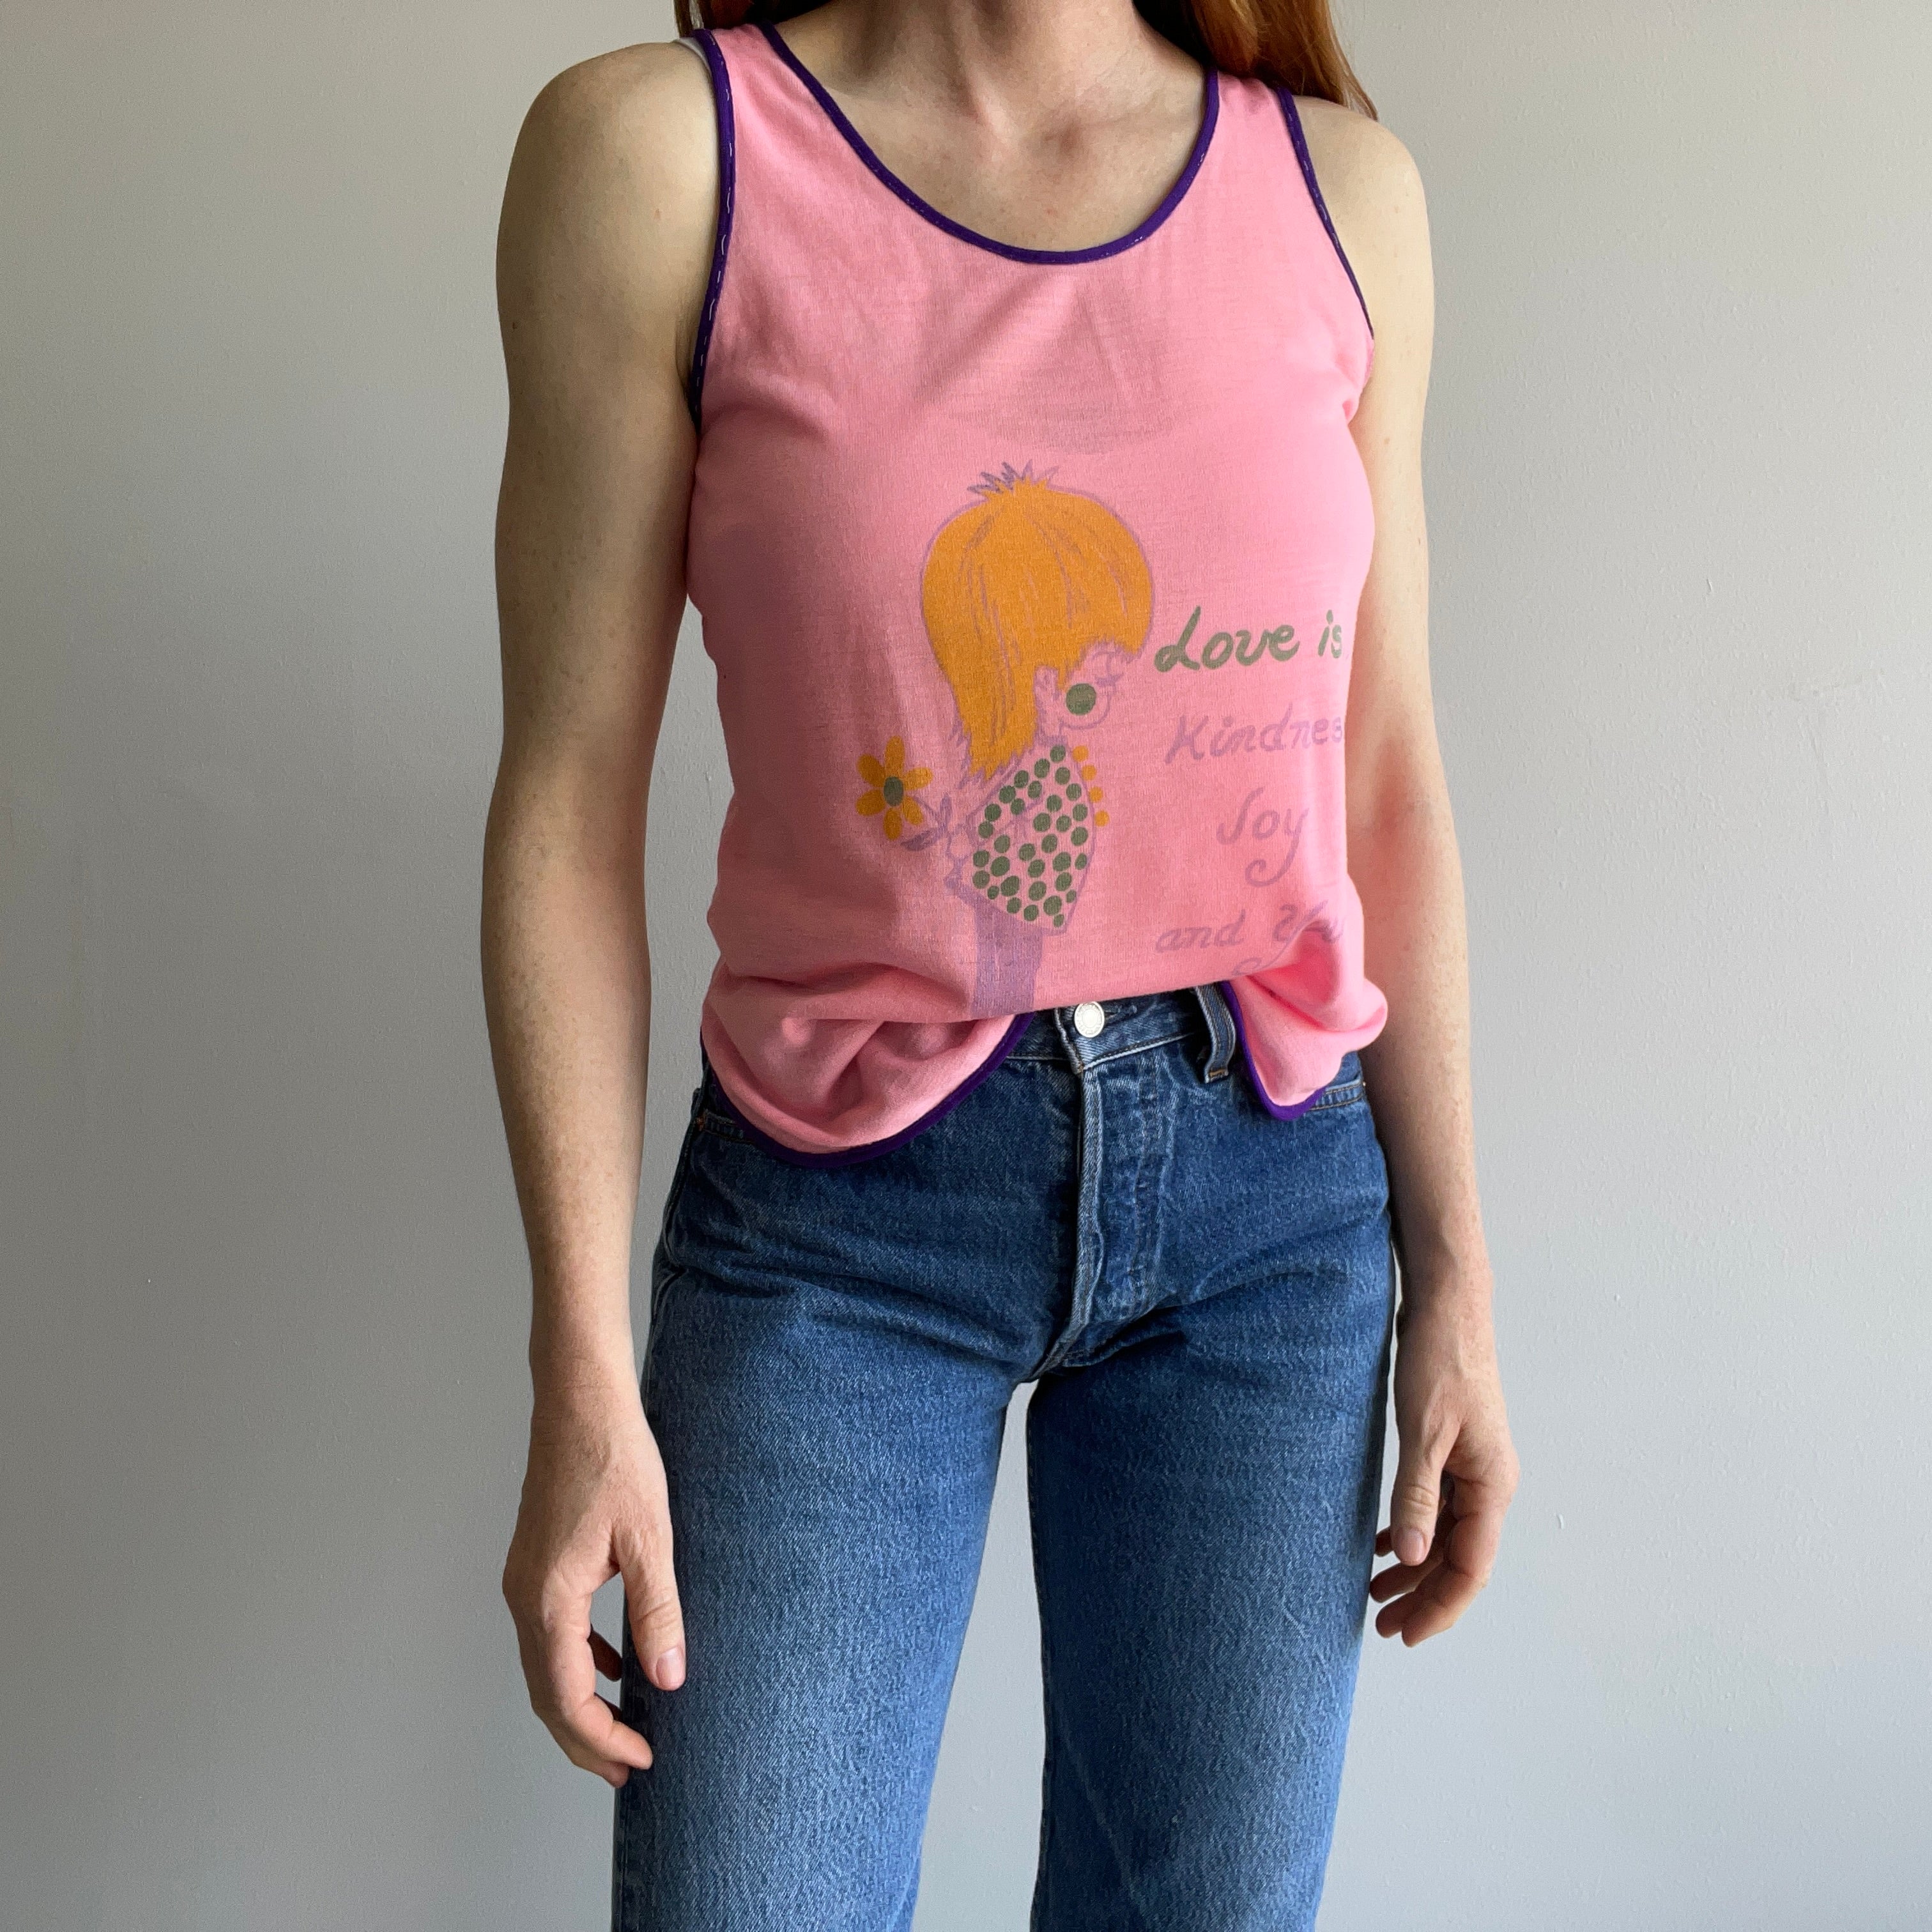 1970/80s Love Is...Kindness, Joy and You Tank Top - Thin and Worn